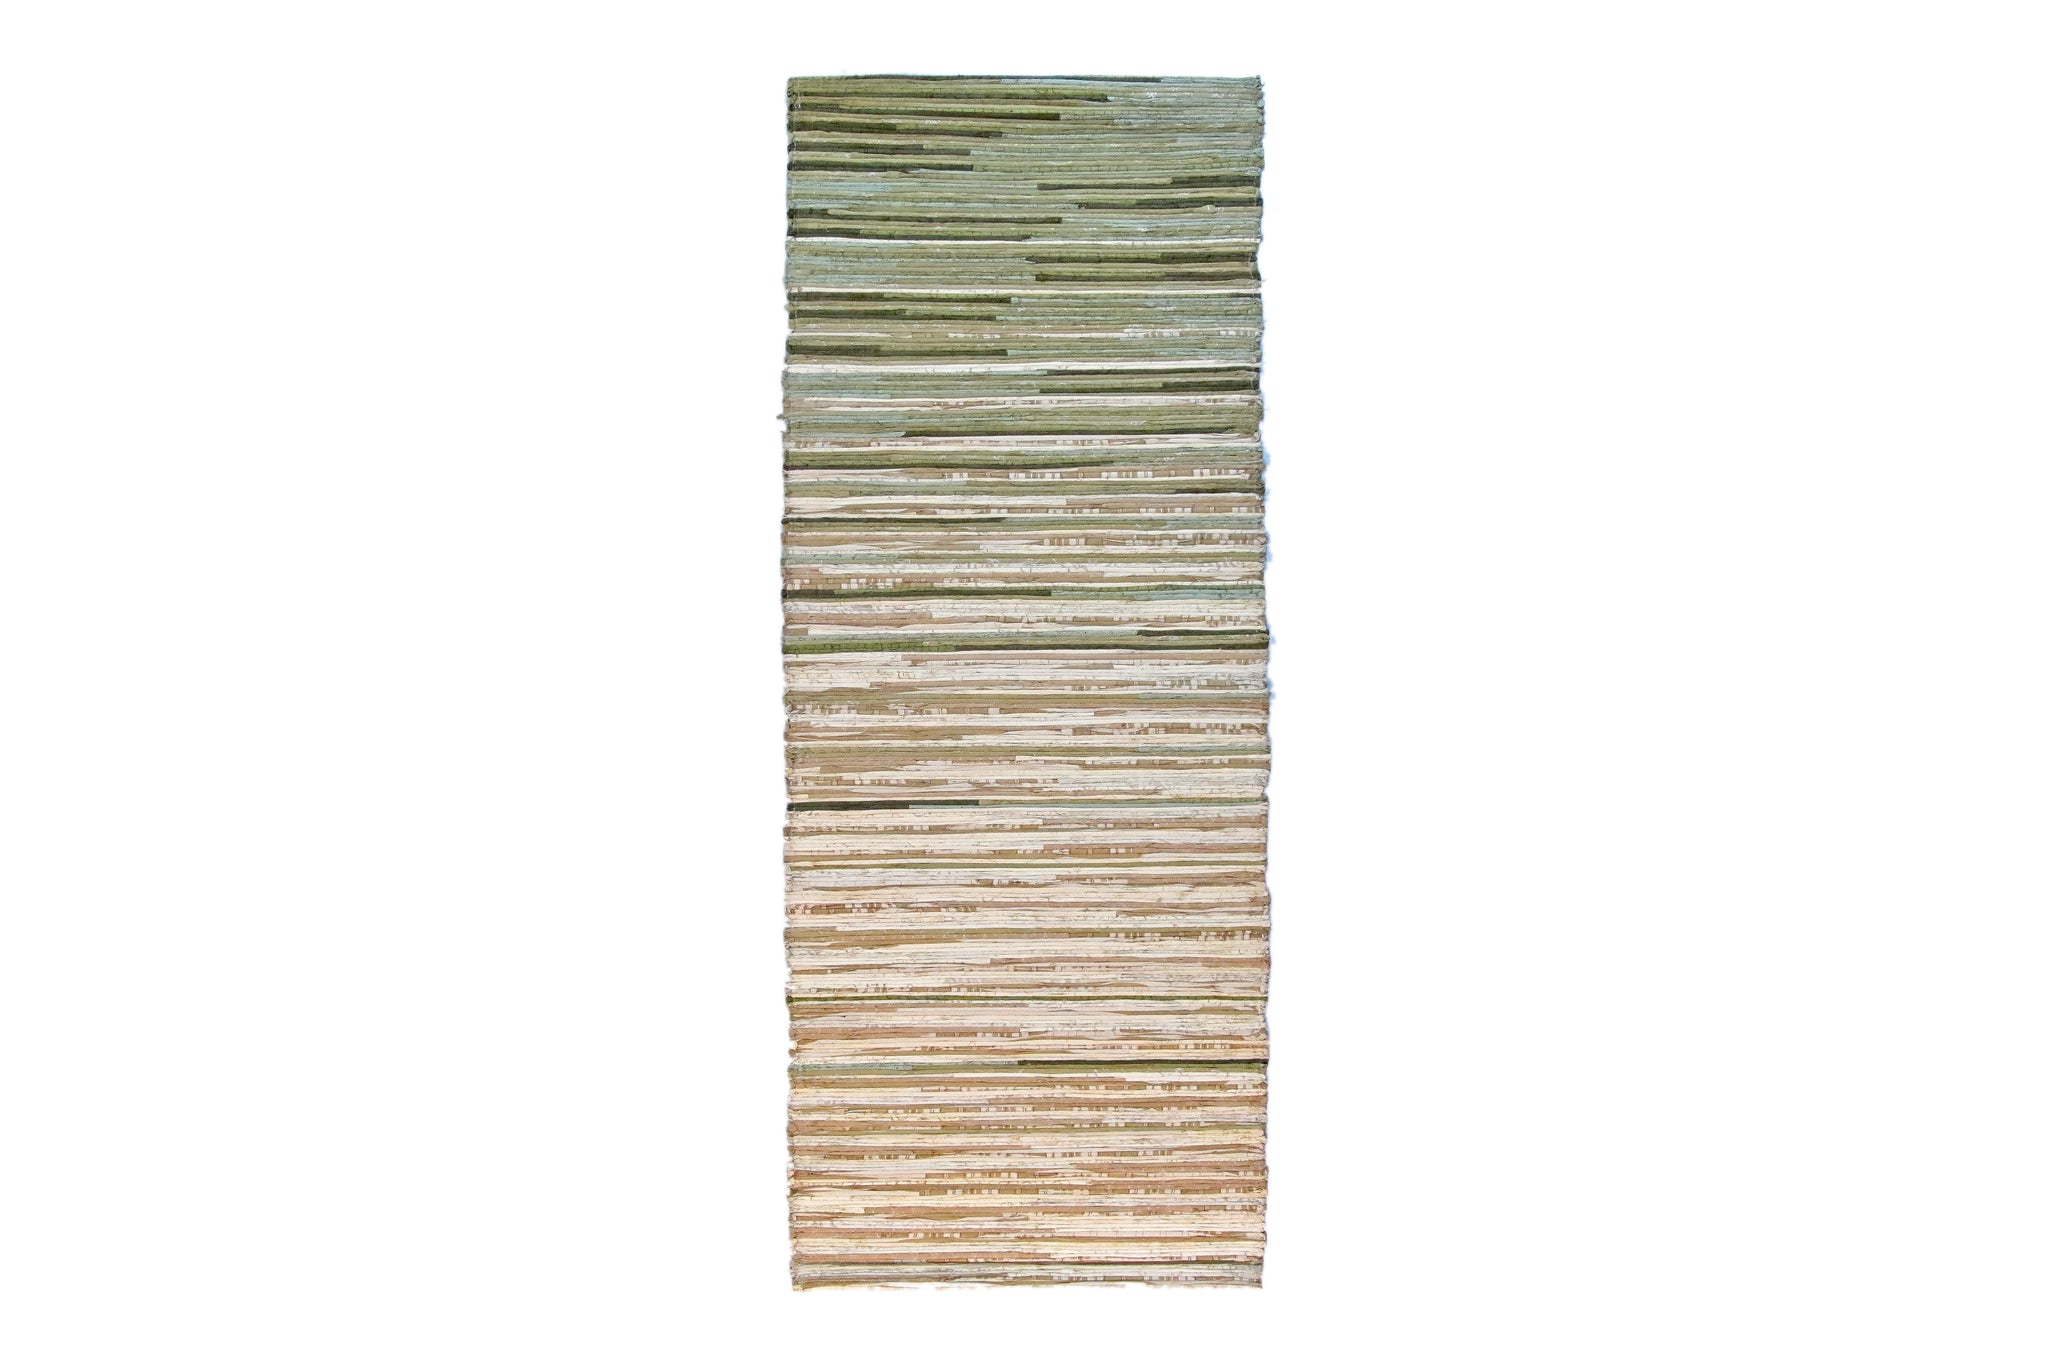 Ombre Paper Strips weave wall hanging